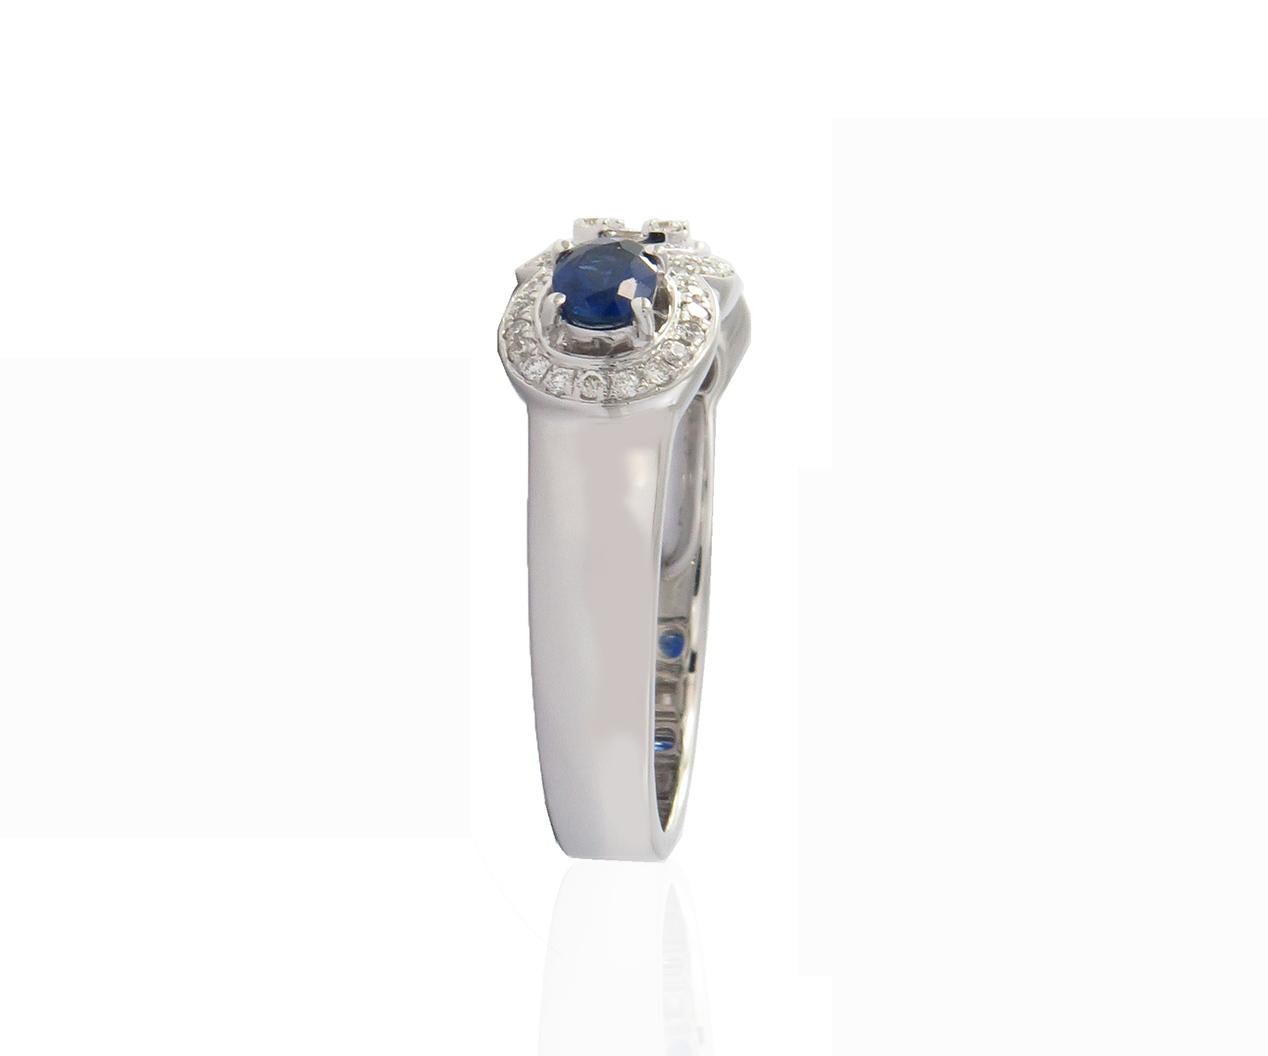 This 18K White Gold cocktail ring features a luscious Emerald shape White Diamond Illusion in Center with beautiful Sapphire stone on a side. Combine with glamorous outfits for a show-stopping effect. Each diamond hand-selected by our experts for